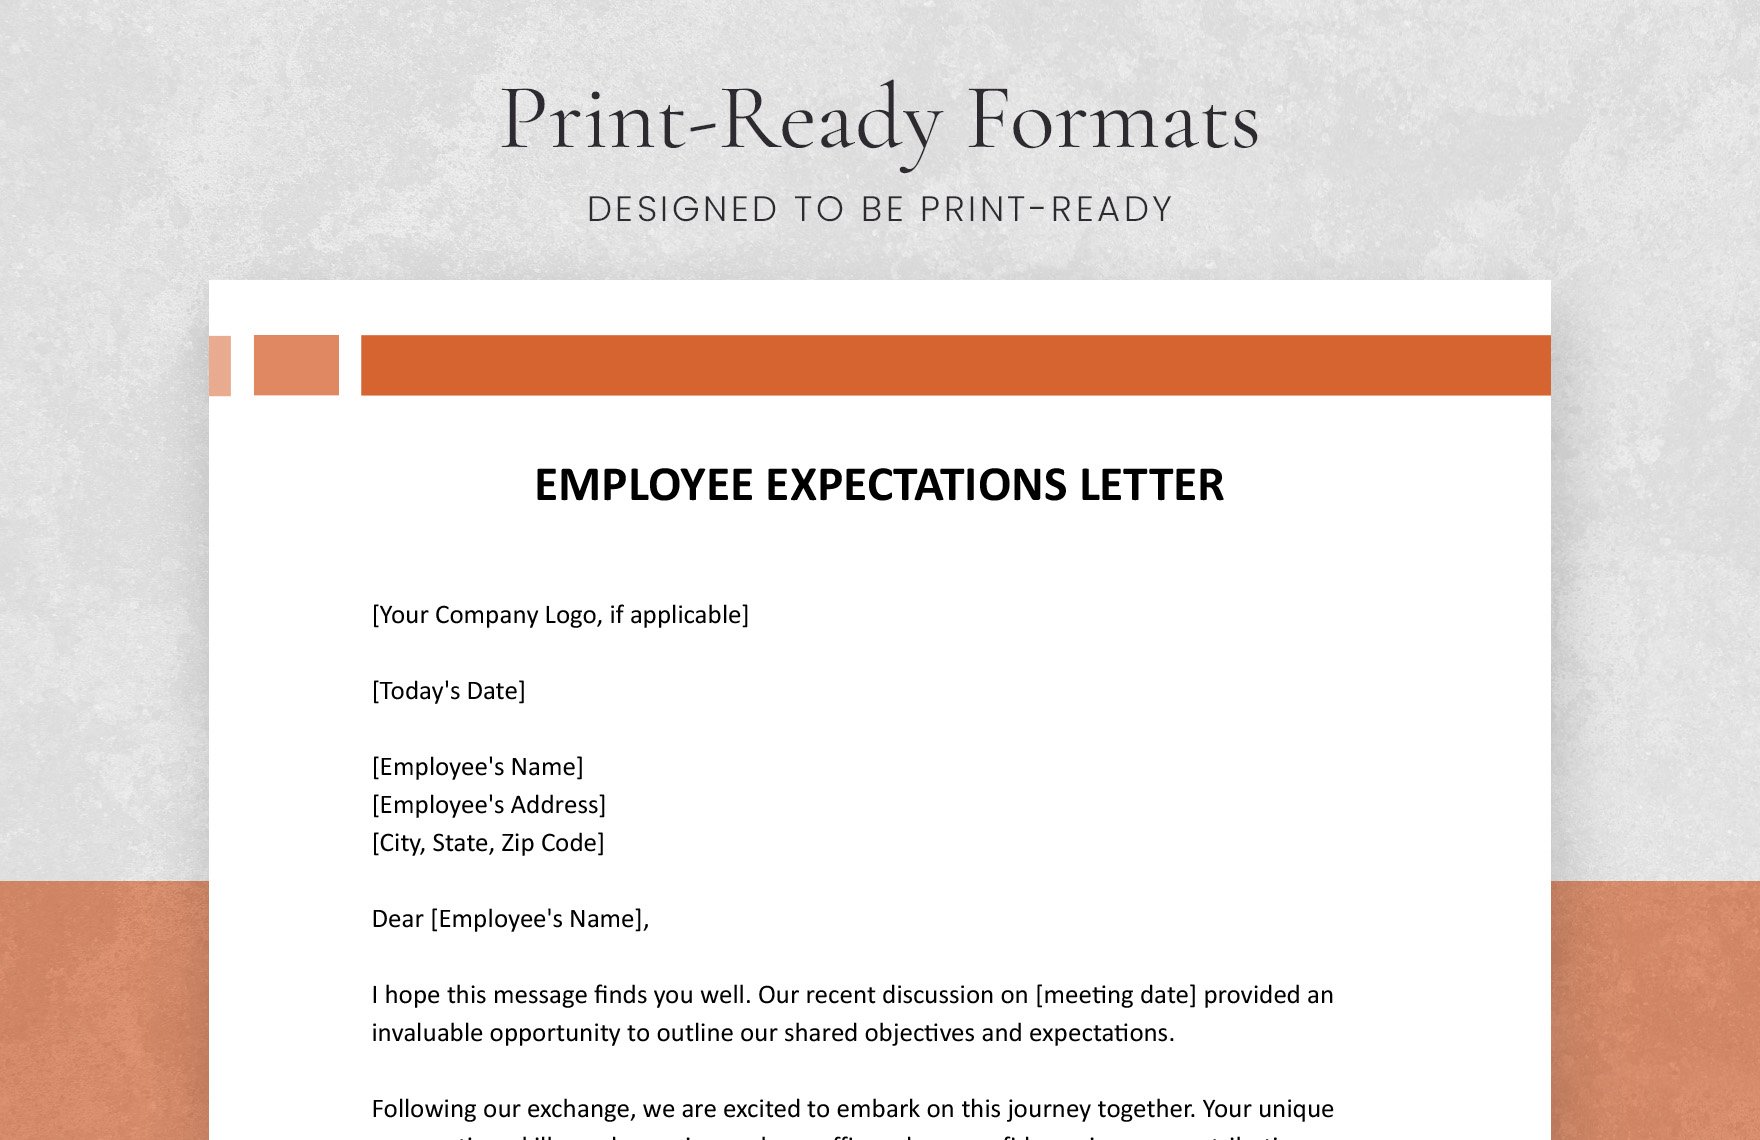 Employee Expectations Letter